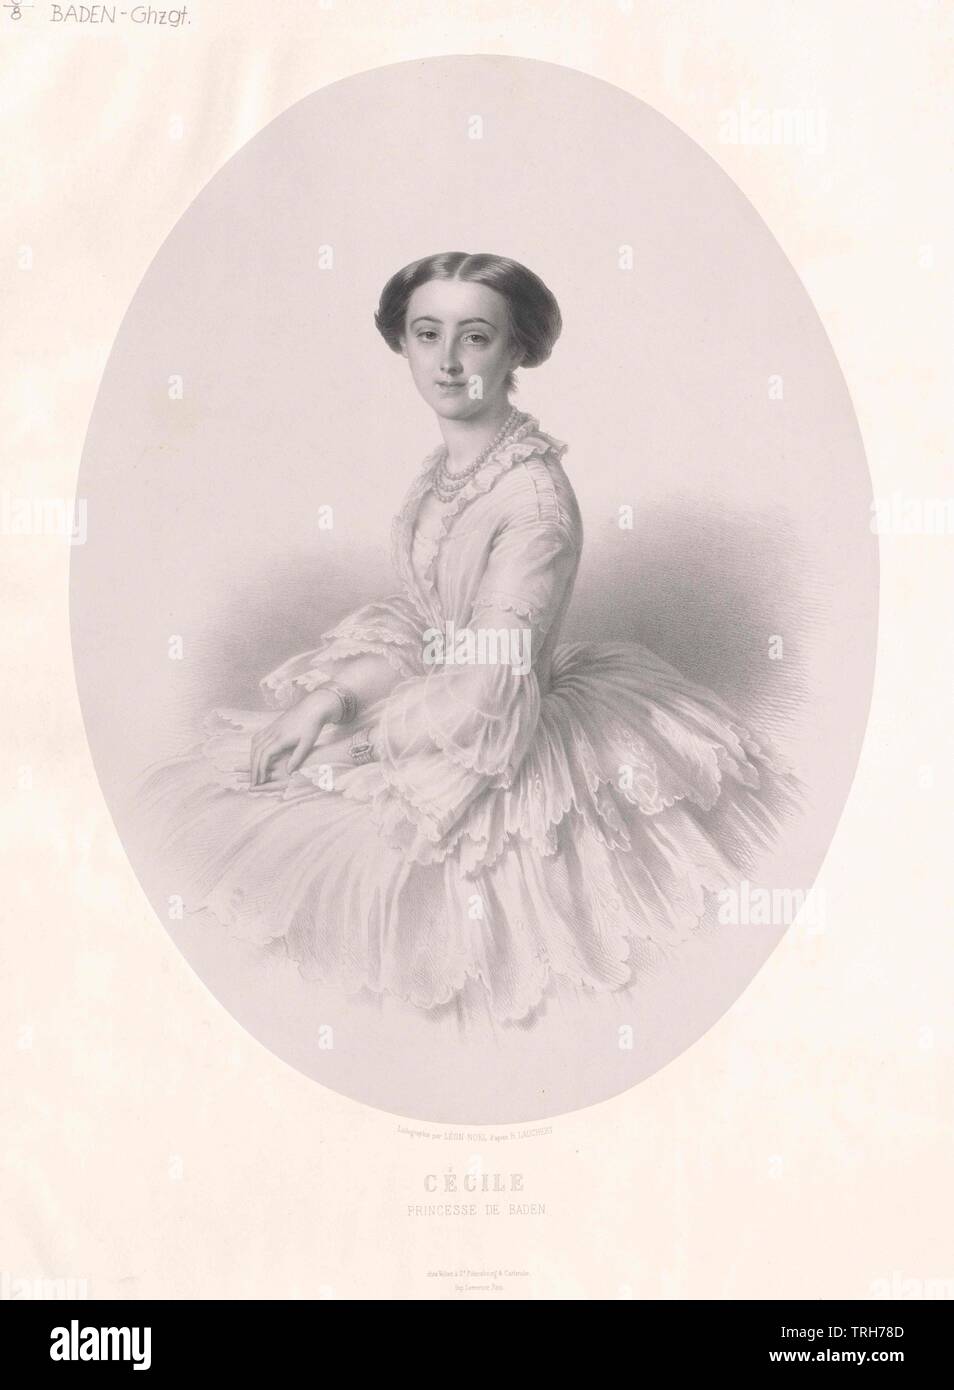 Cecilia, Princess of Baden,Baden, margrave, margrave and landgraves, miscellaneous potentates, people, half-length, half length, woman, women, female, princess, princesses, Additional-Rights-Clearance-Info-Not-Available Stock Photo